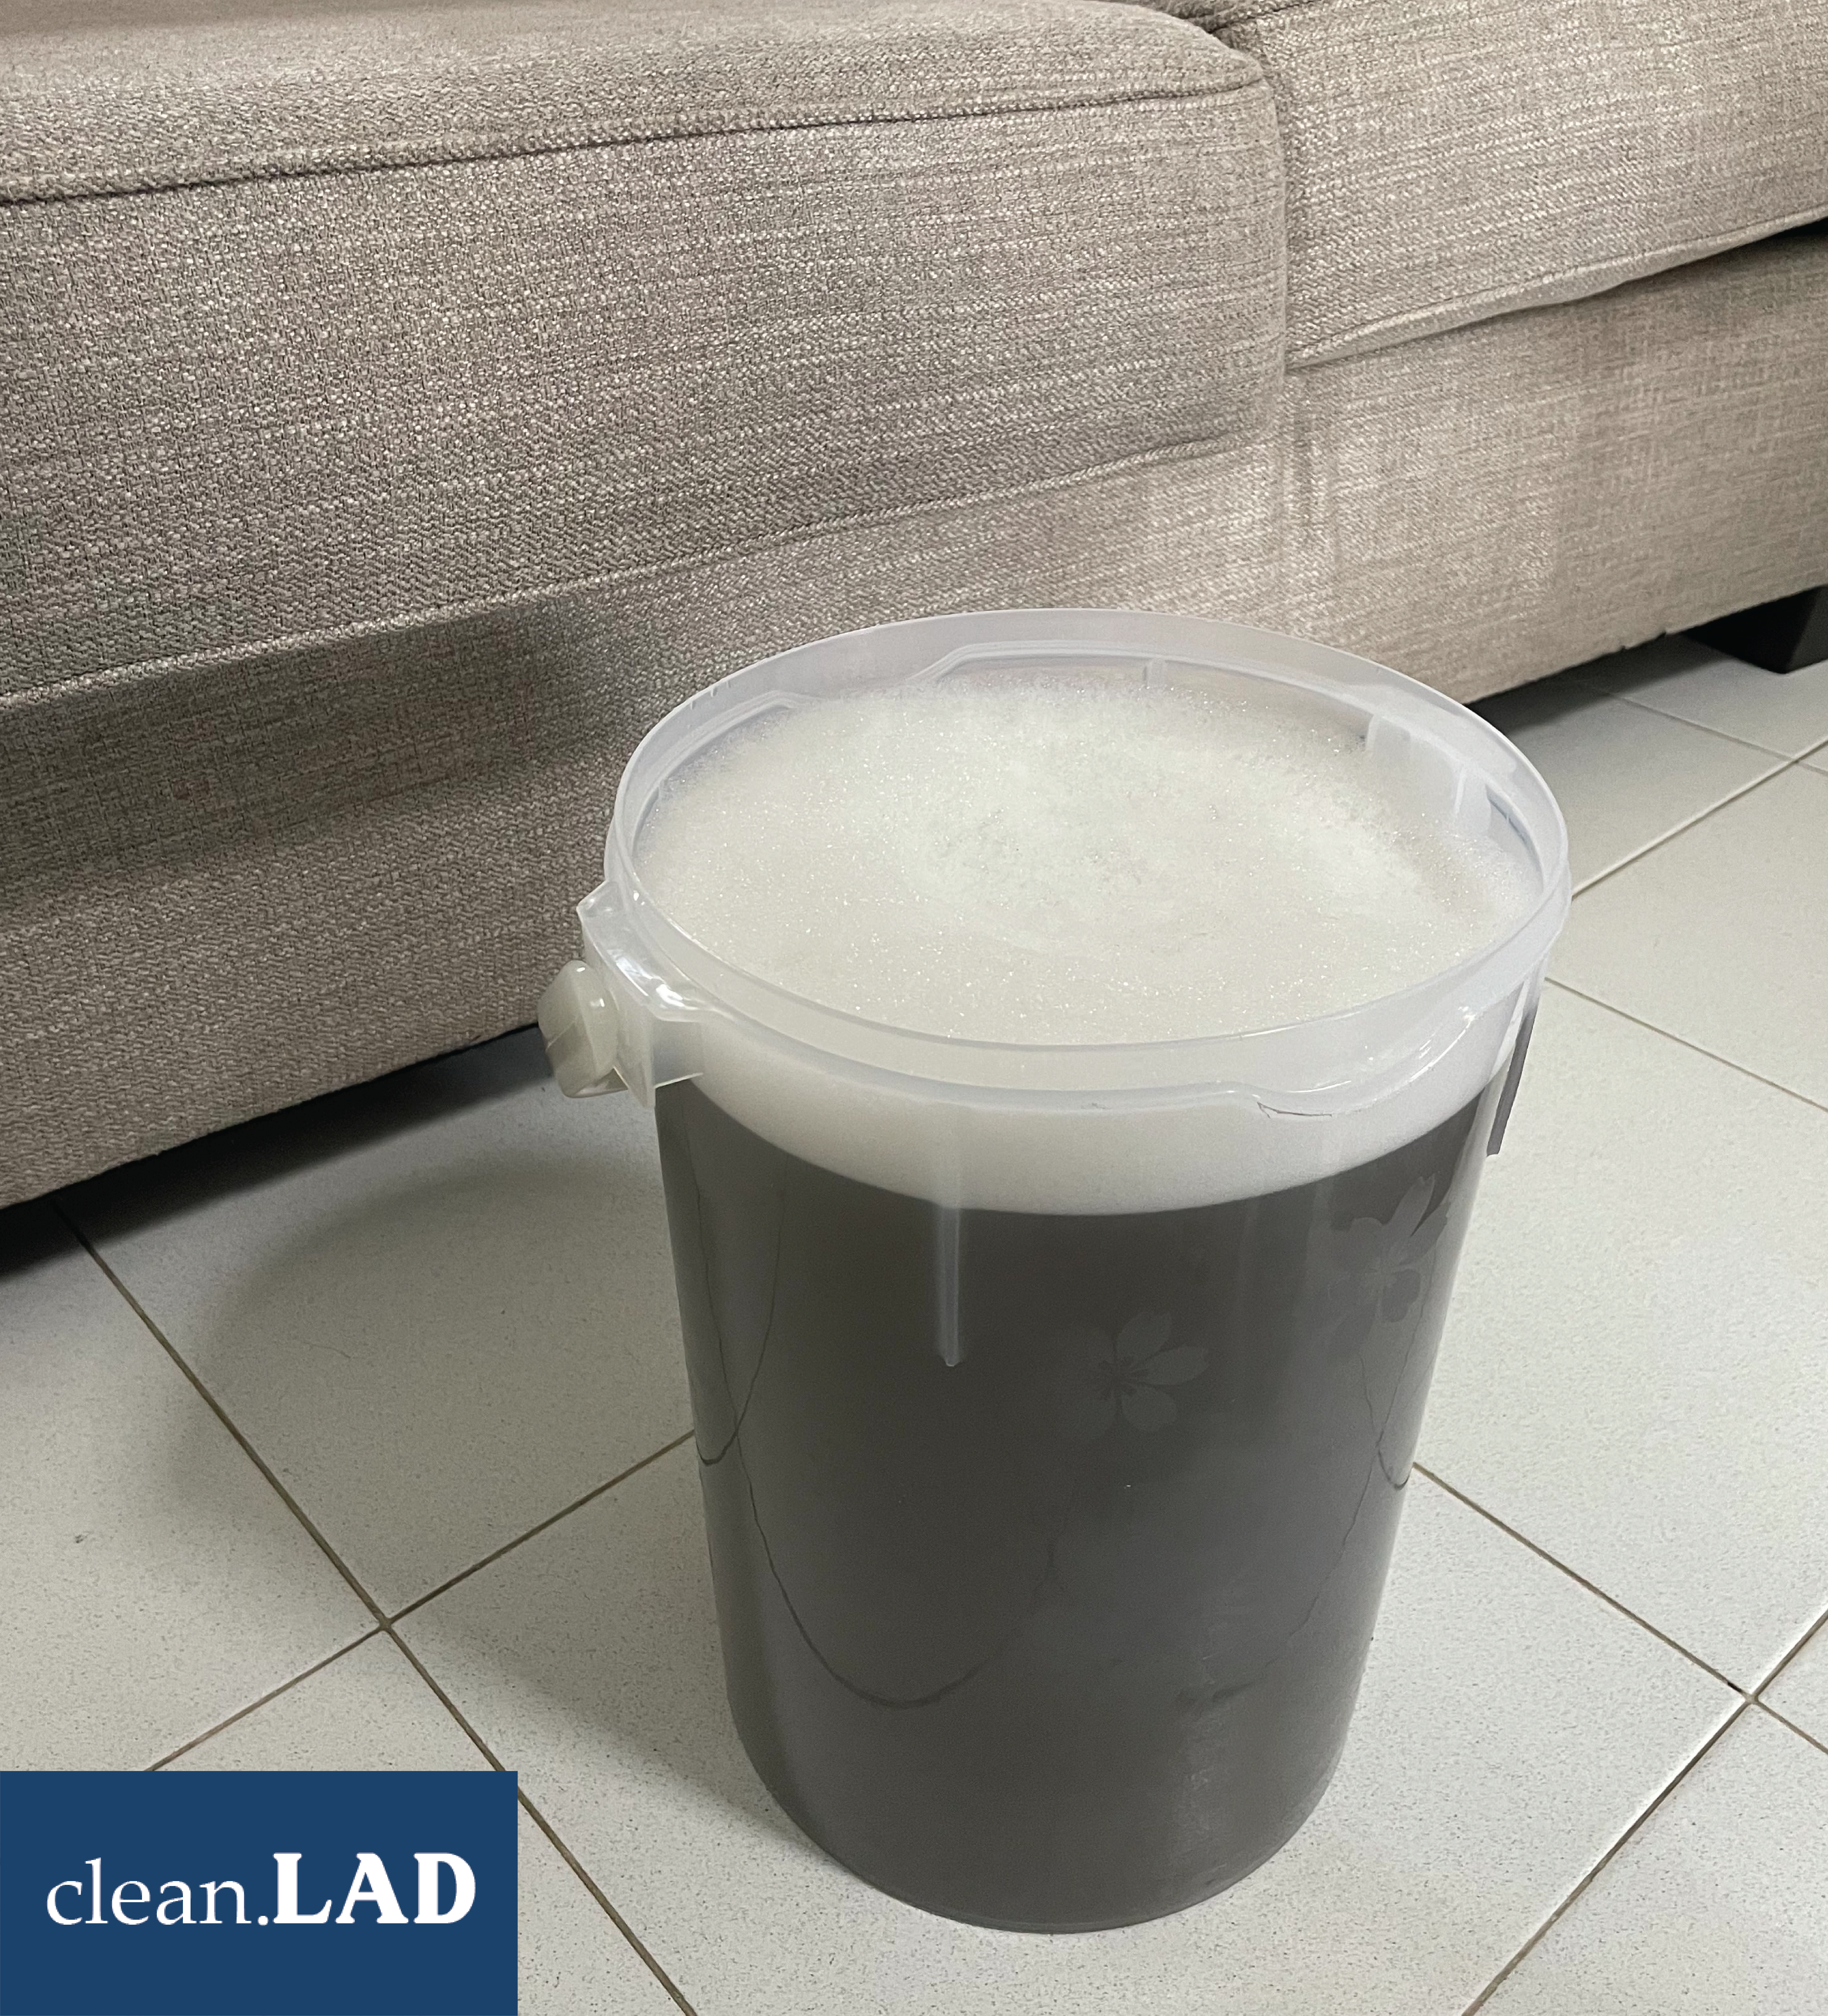 Sofa Cleaning Service | cleanLAD